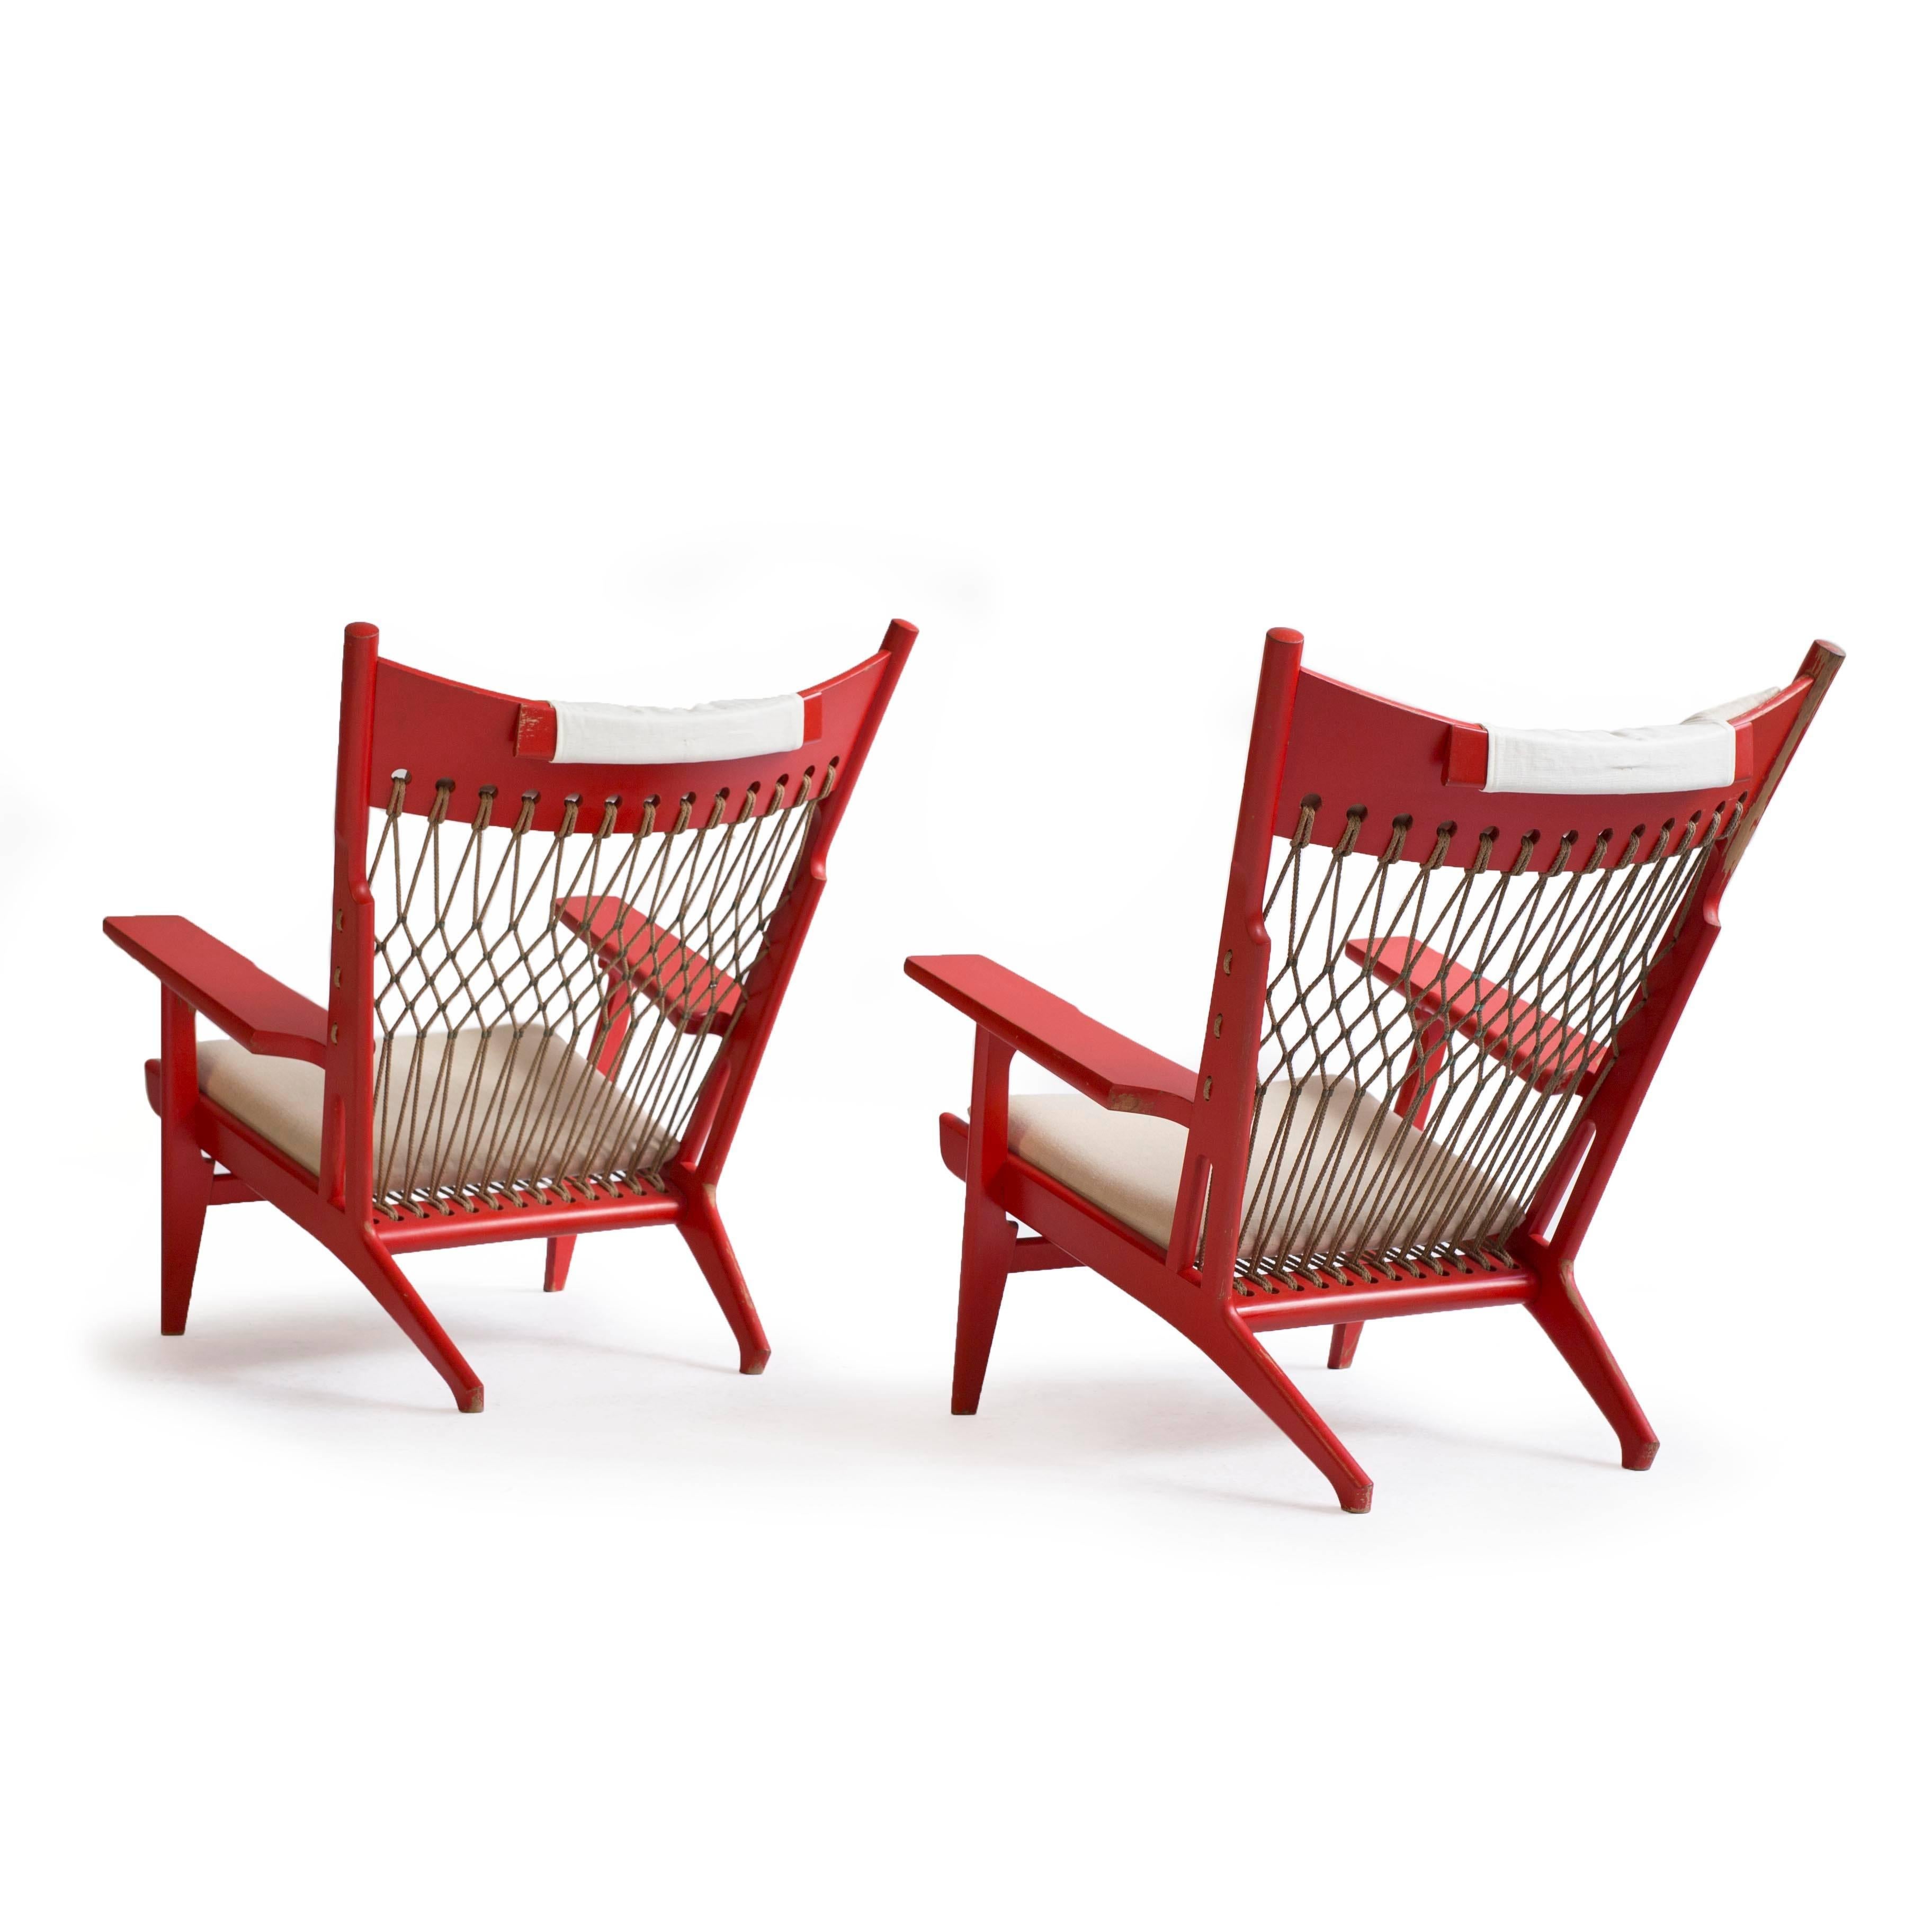 A pair of very rare Hans J. Wegner JH-719 lounge chairs.

Priced and sold individually. 

Designed 1968 and made by cabinetmaker Johannes Hansen.
Frame of red lacquered wood, seat and back of woven flag halyard and brass assemblings. Seat and head